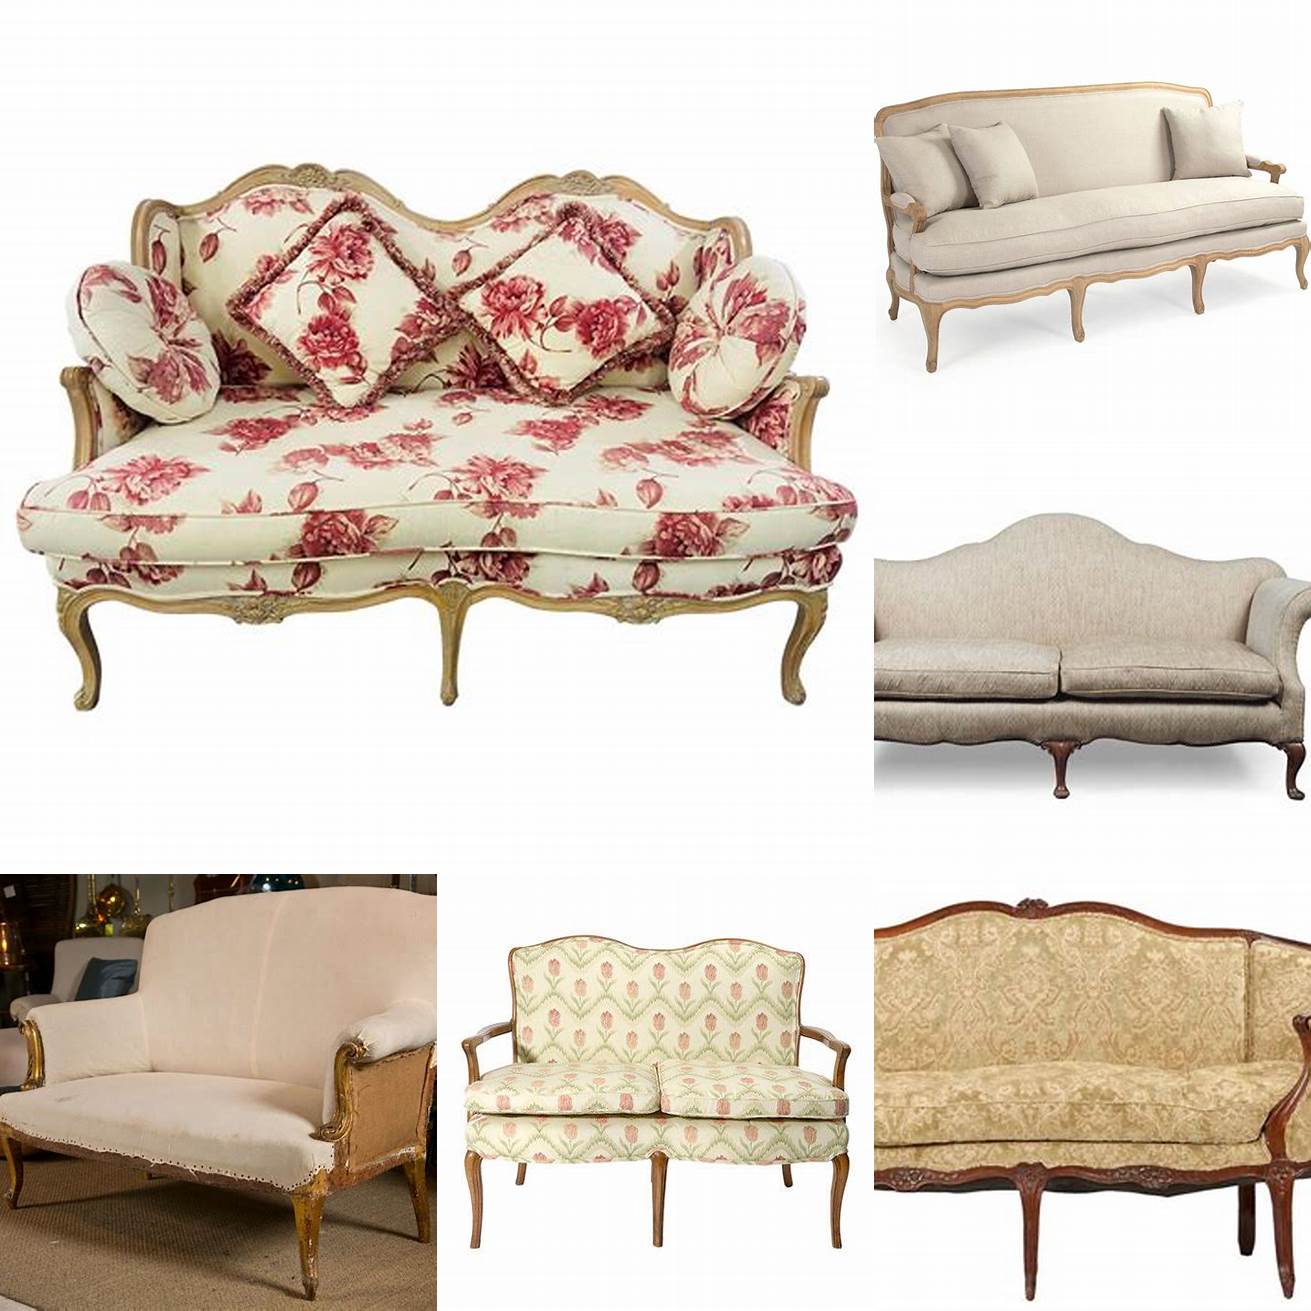 French style settee with cabriole legs and floral upholstery